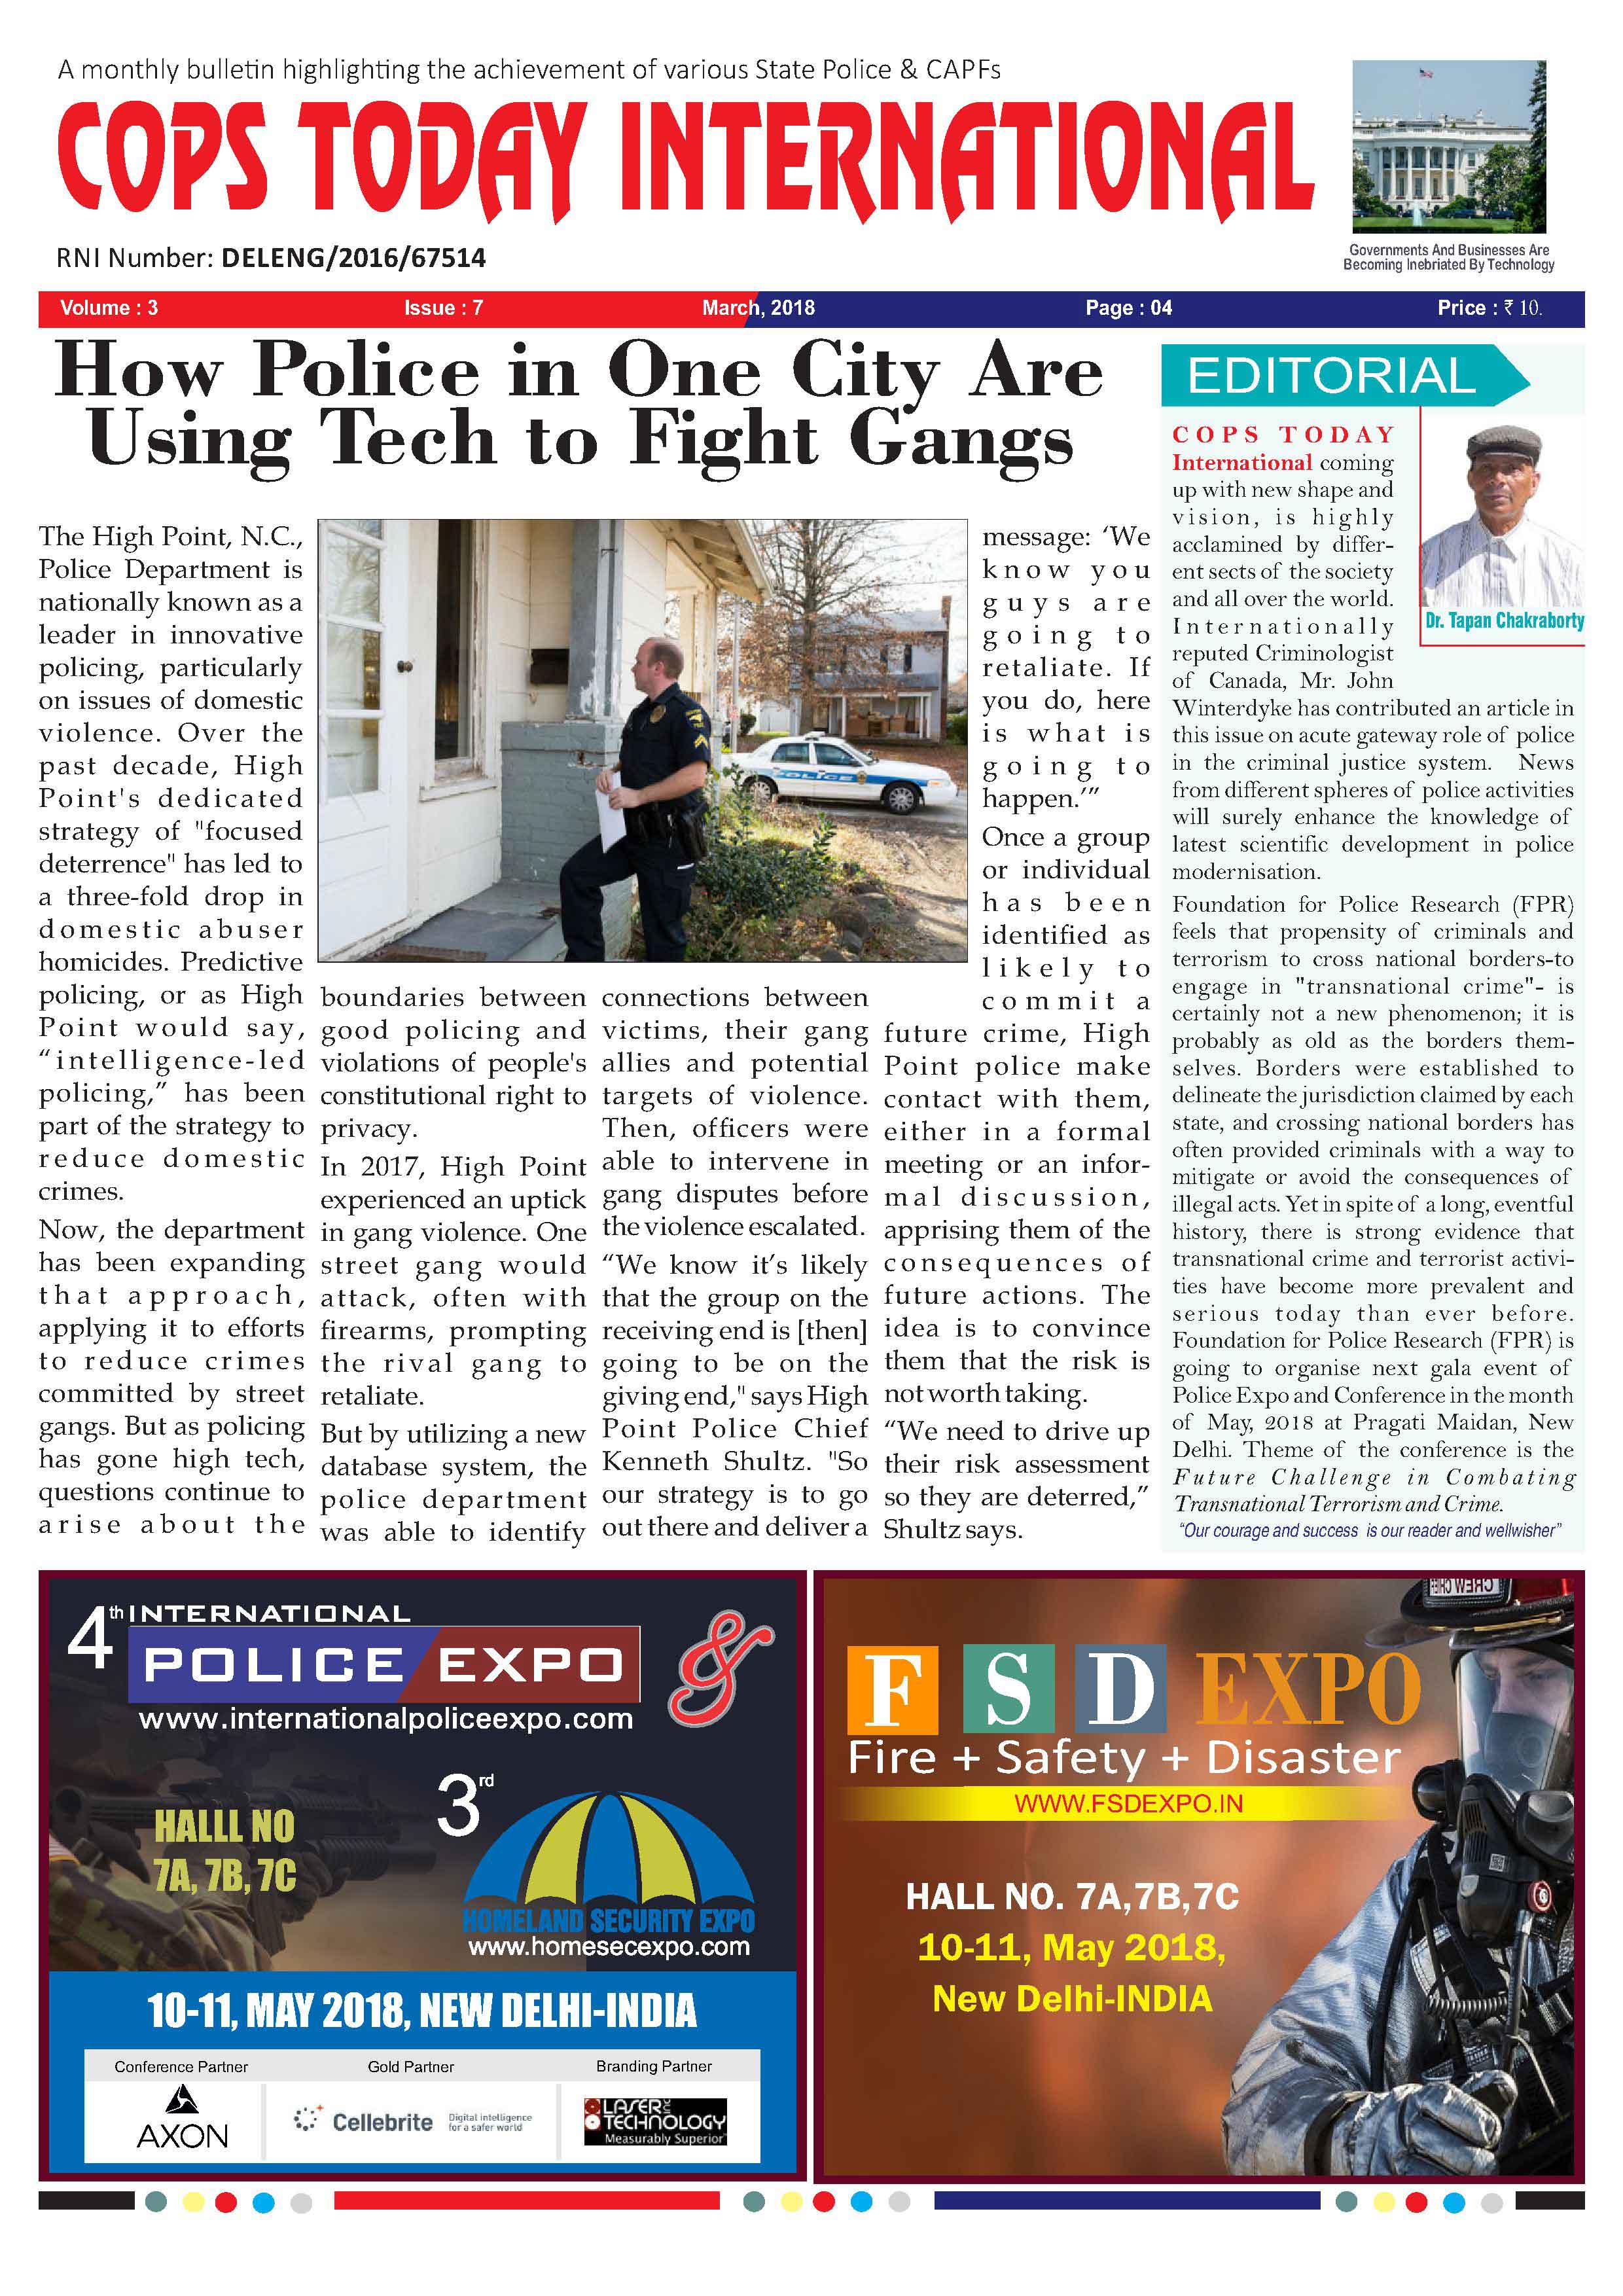 Cops Today News Paper of March 2018